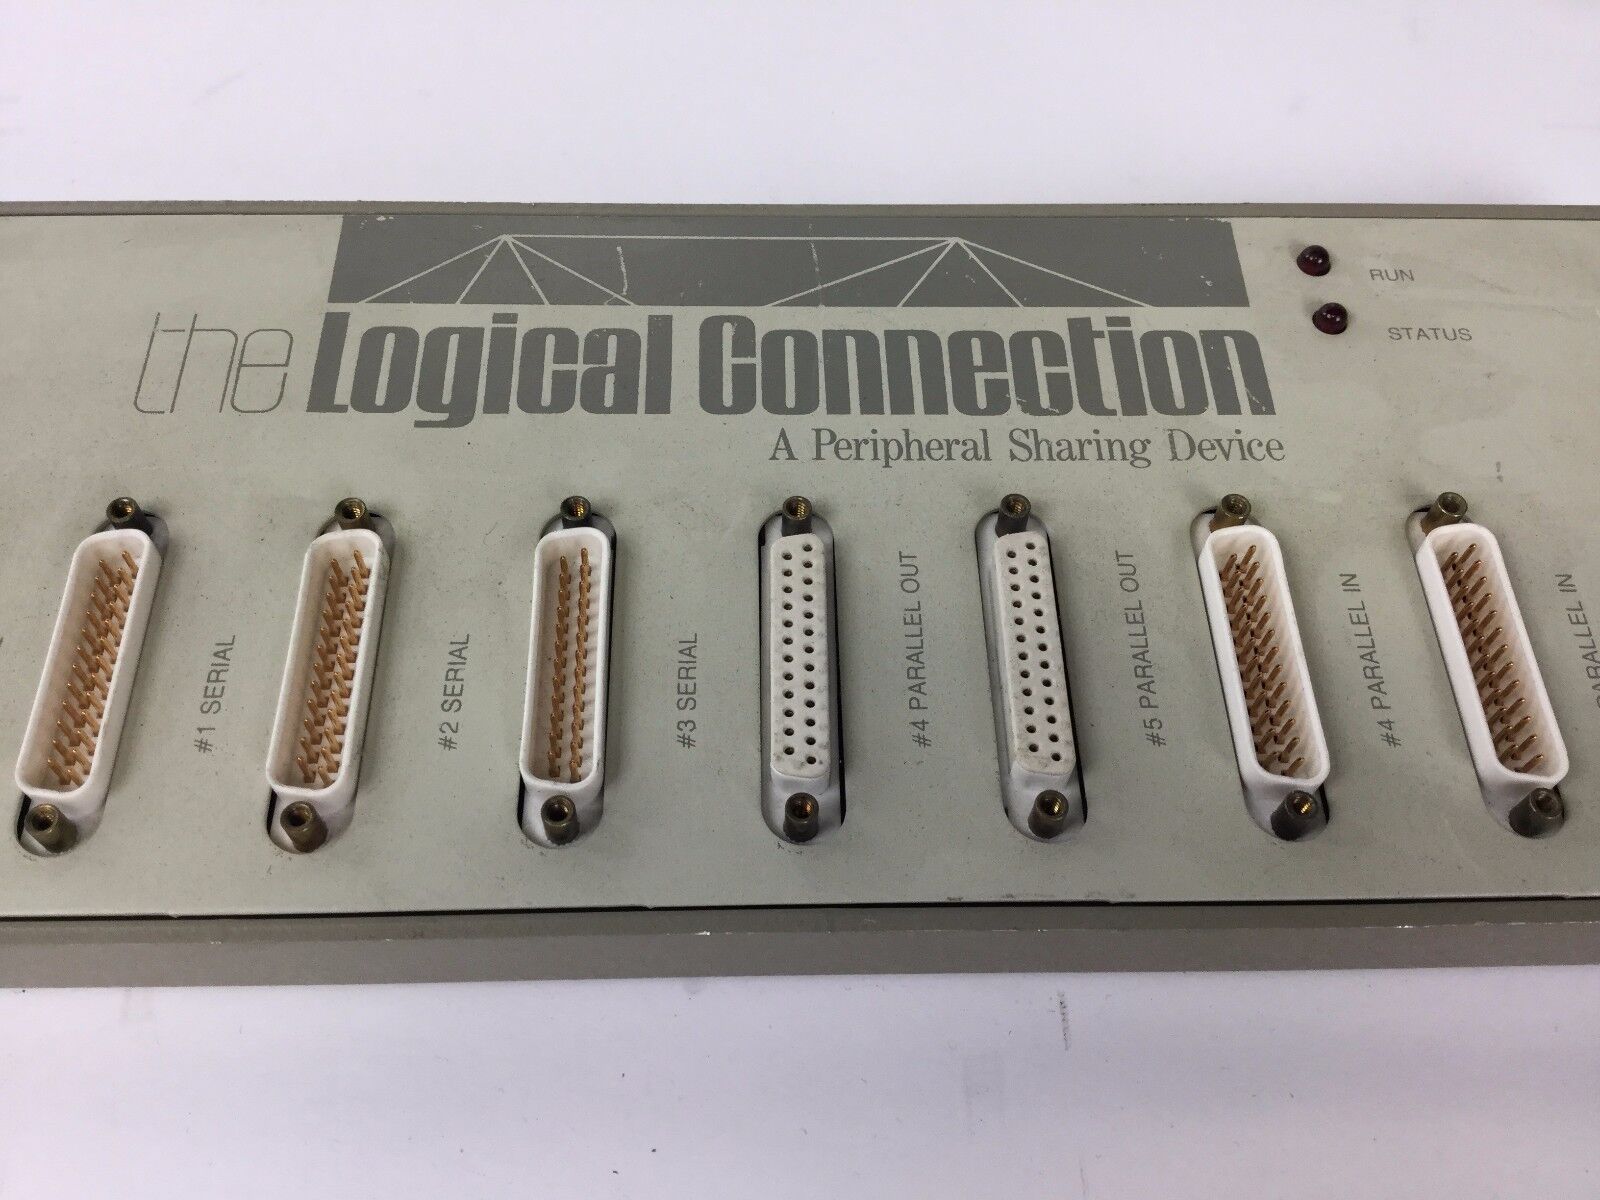 Fifth Generation - The Logical Connection Model LC-01 Peripheral Sharing Device